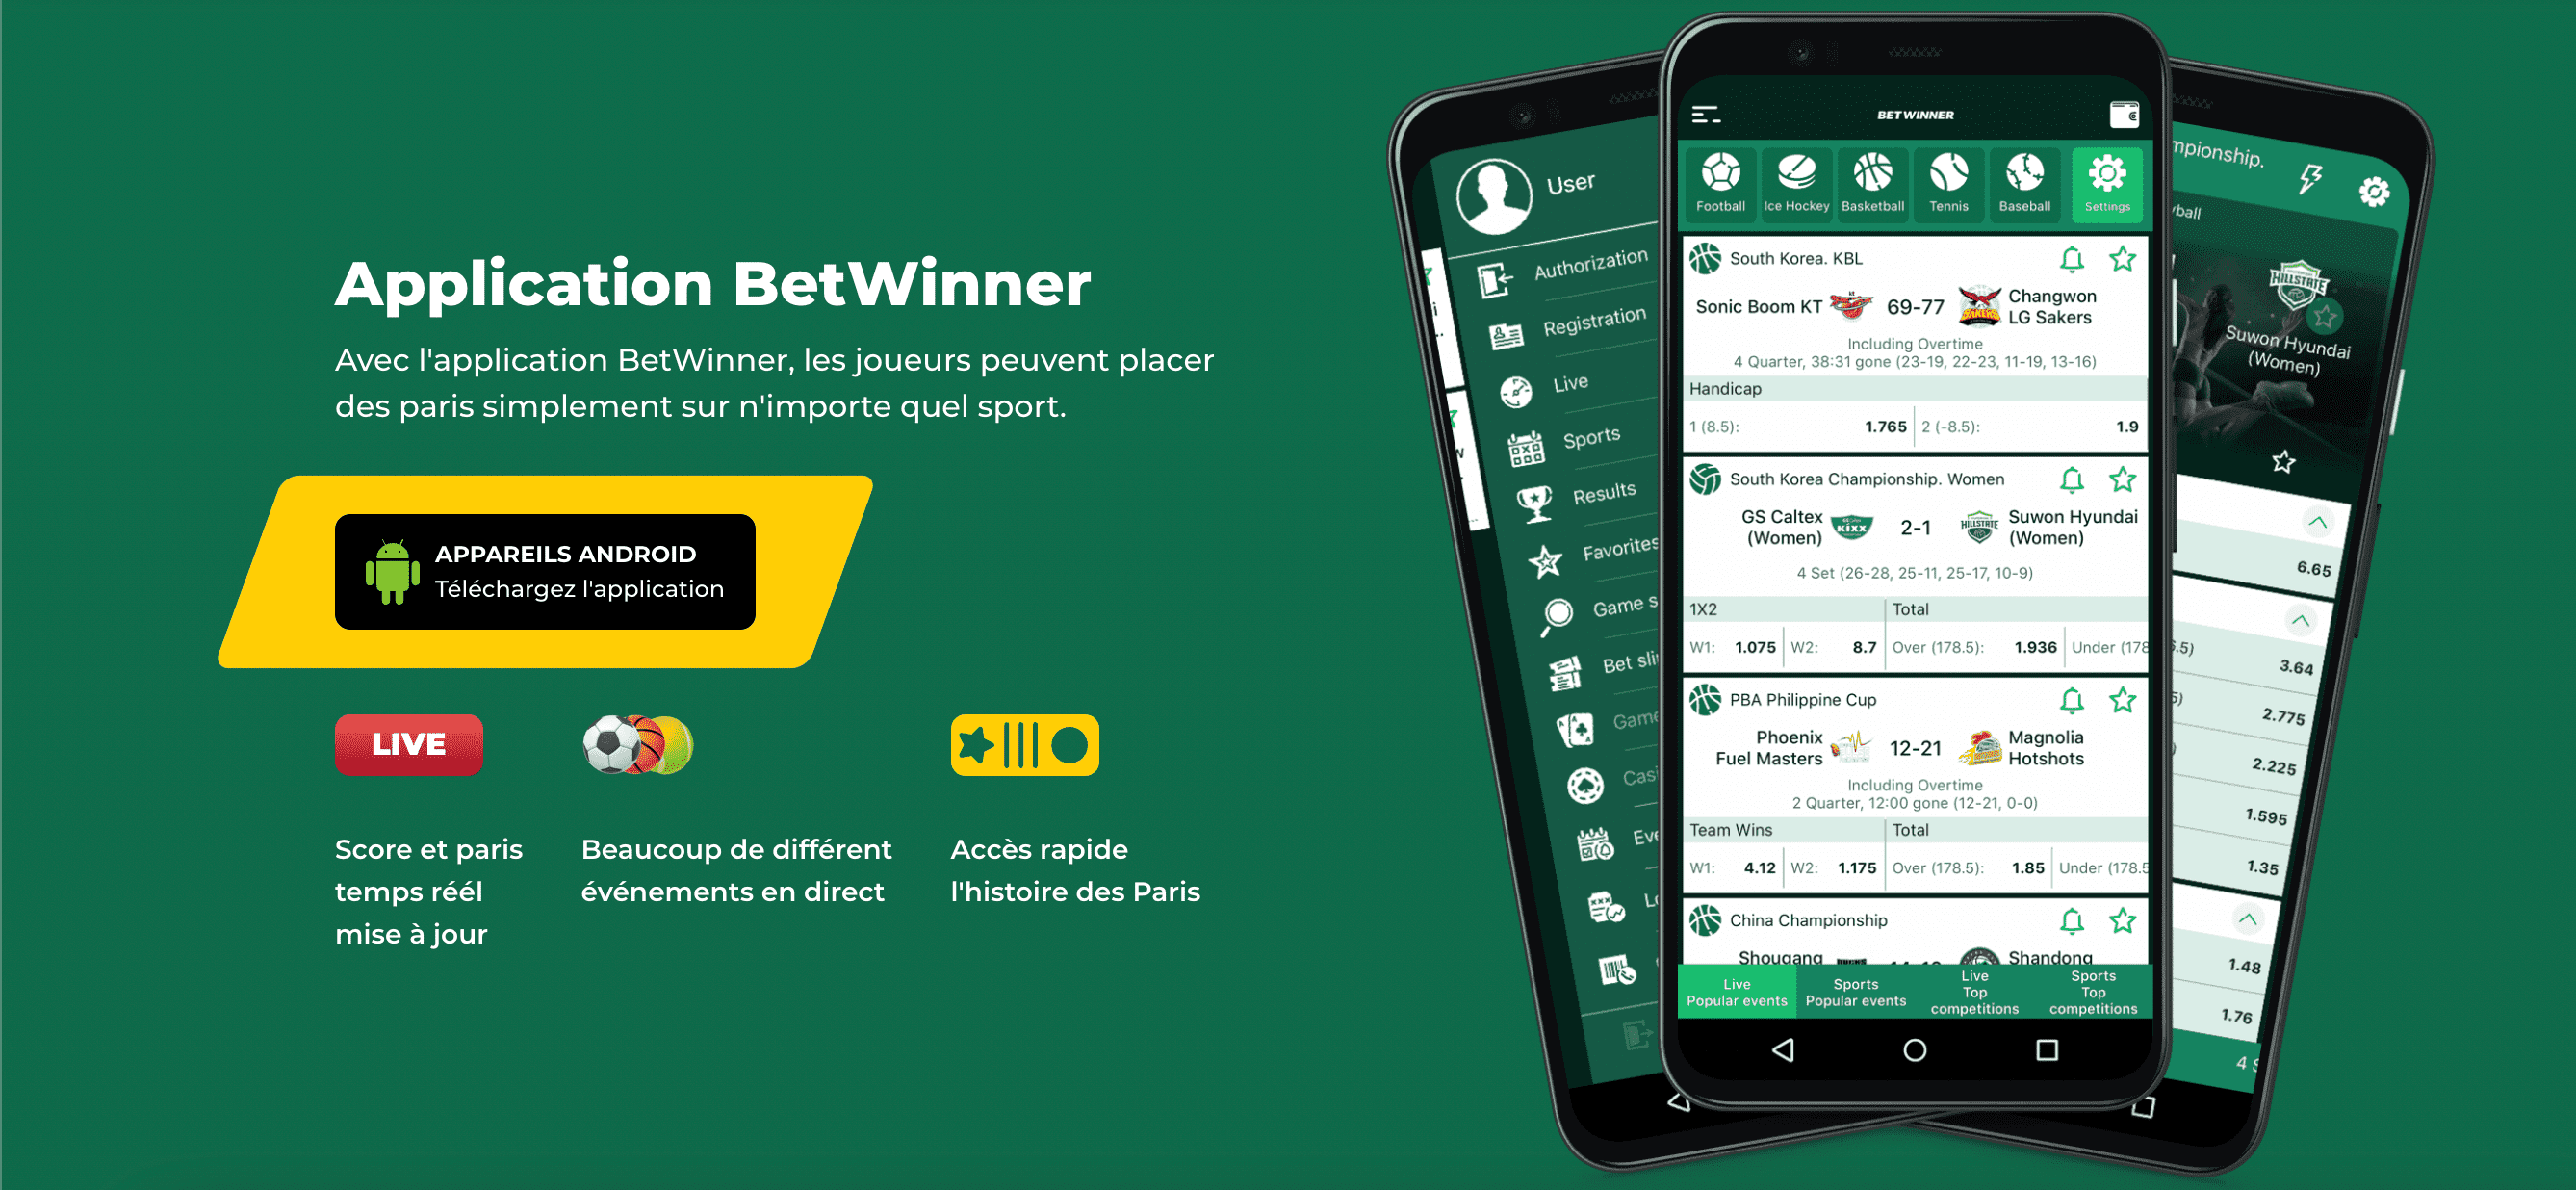 How I Got Started With betwinner 1xbet